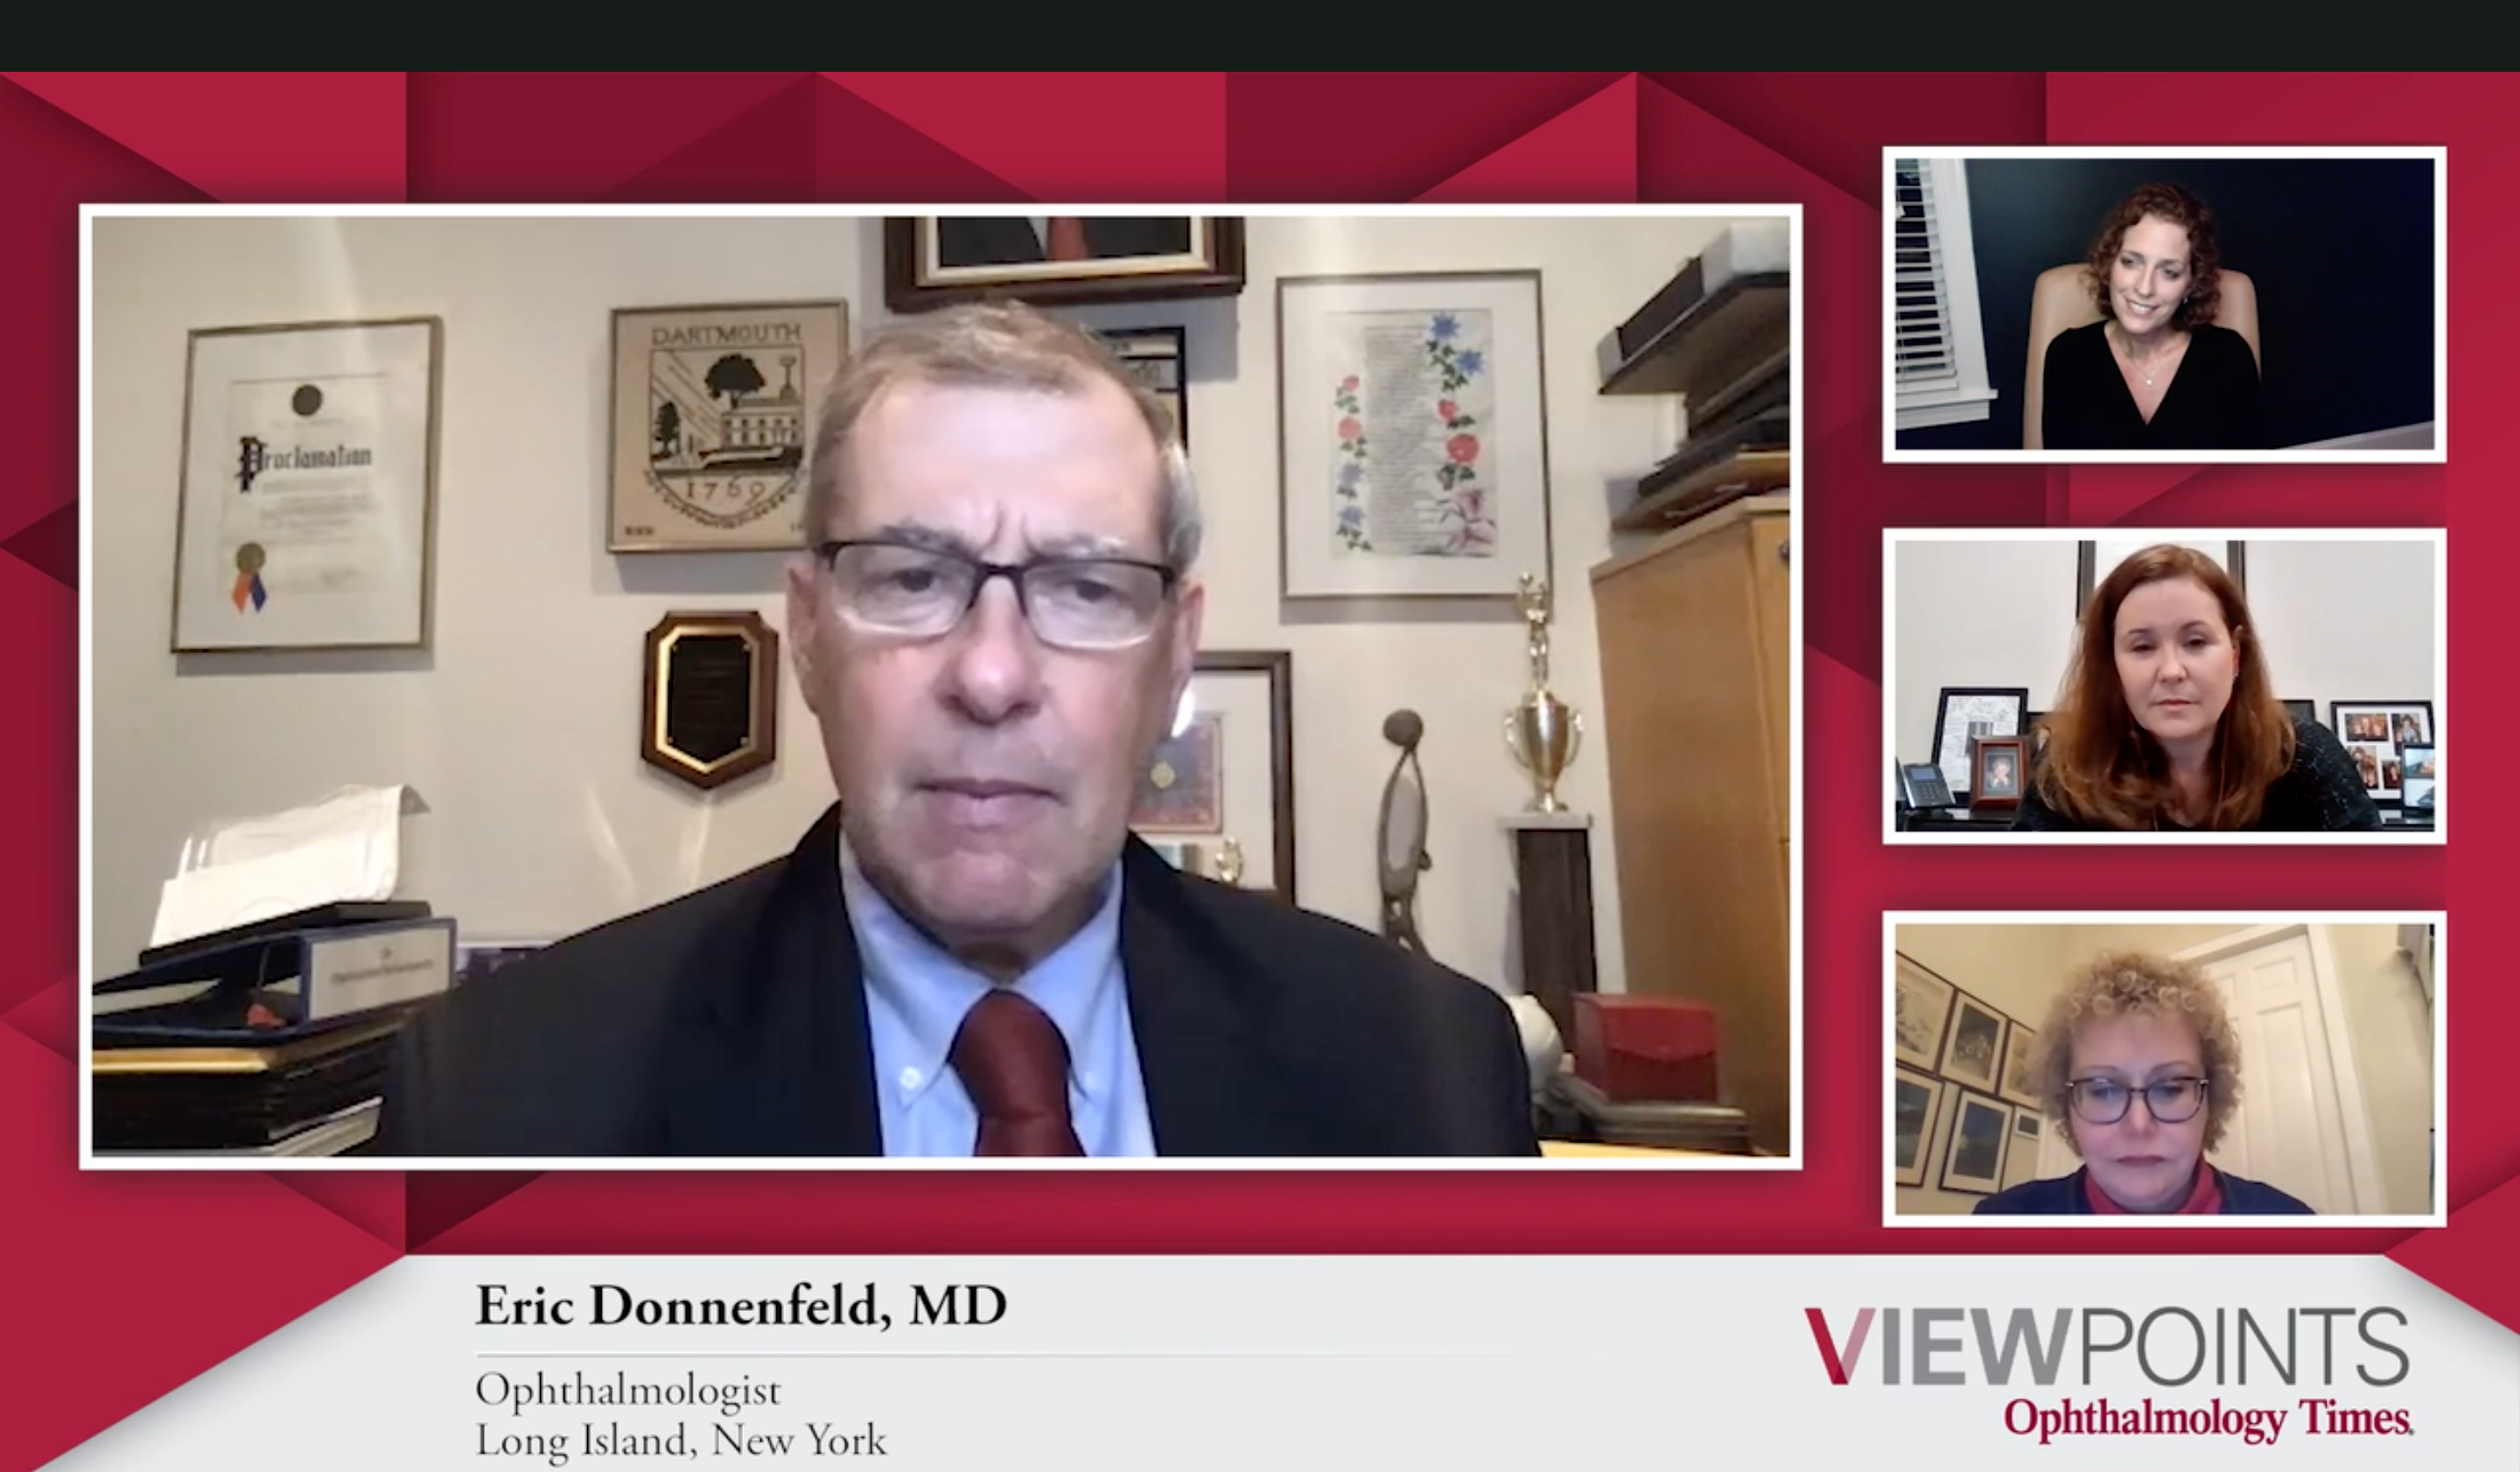 Diagnosis and overlooking asymptomatic patients with dry eye